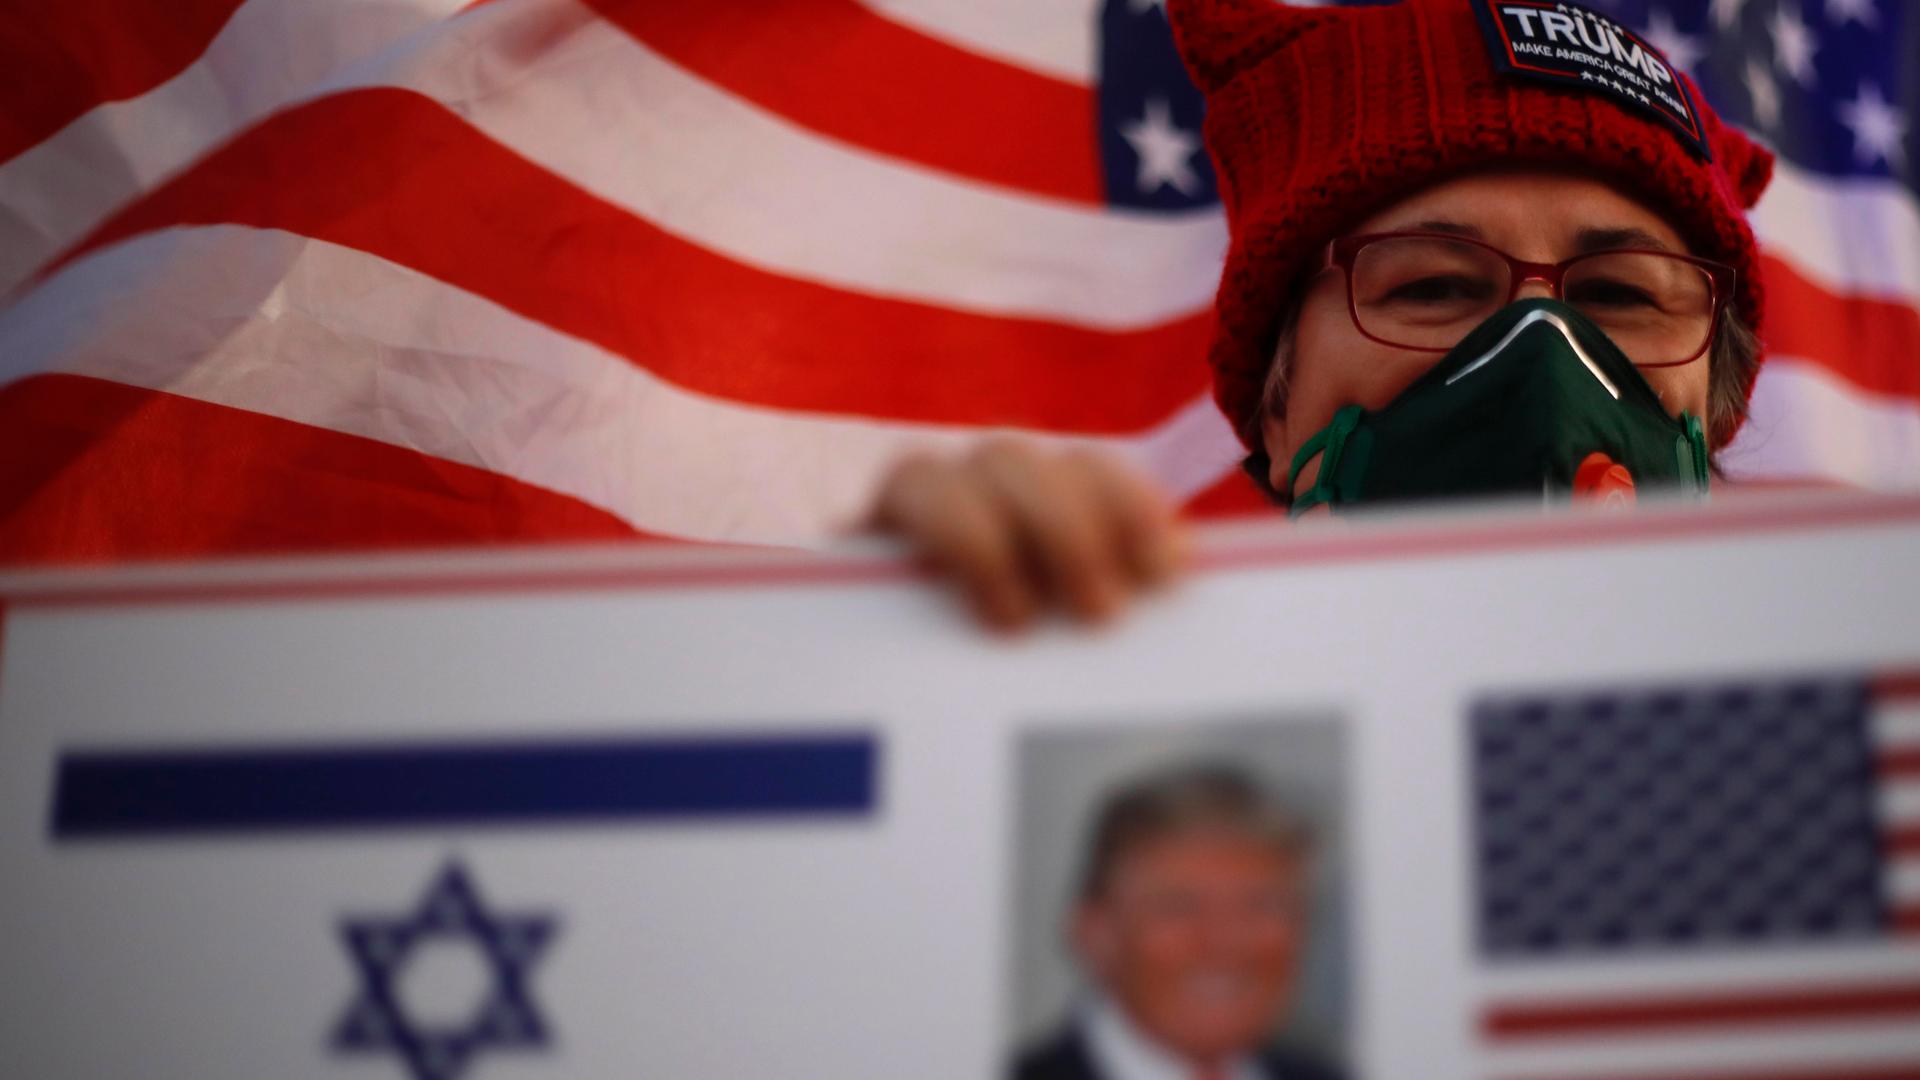 A supporter of US President Donald Trump waves Israeli and US national flags on the day of the U.S. presidential election, in Carmiel, northern Israel, Nov. 3, 2020.